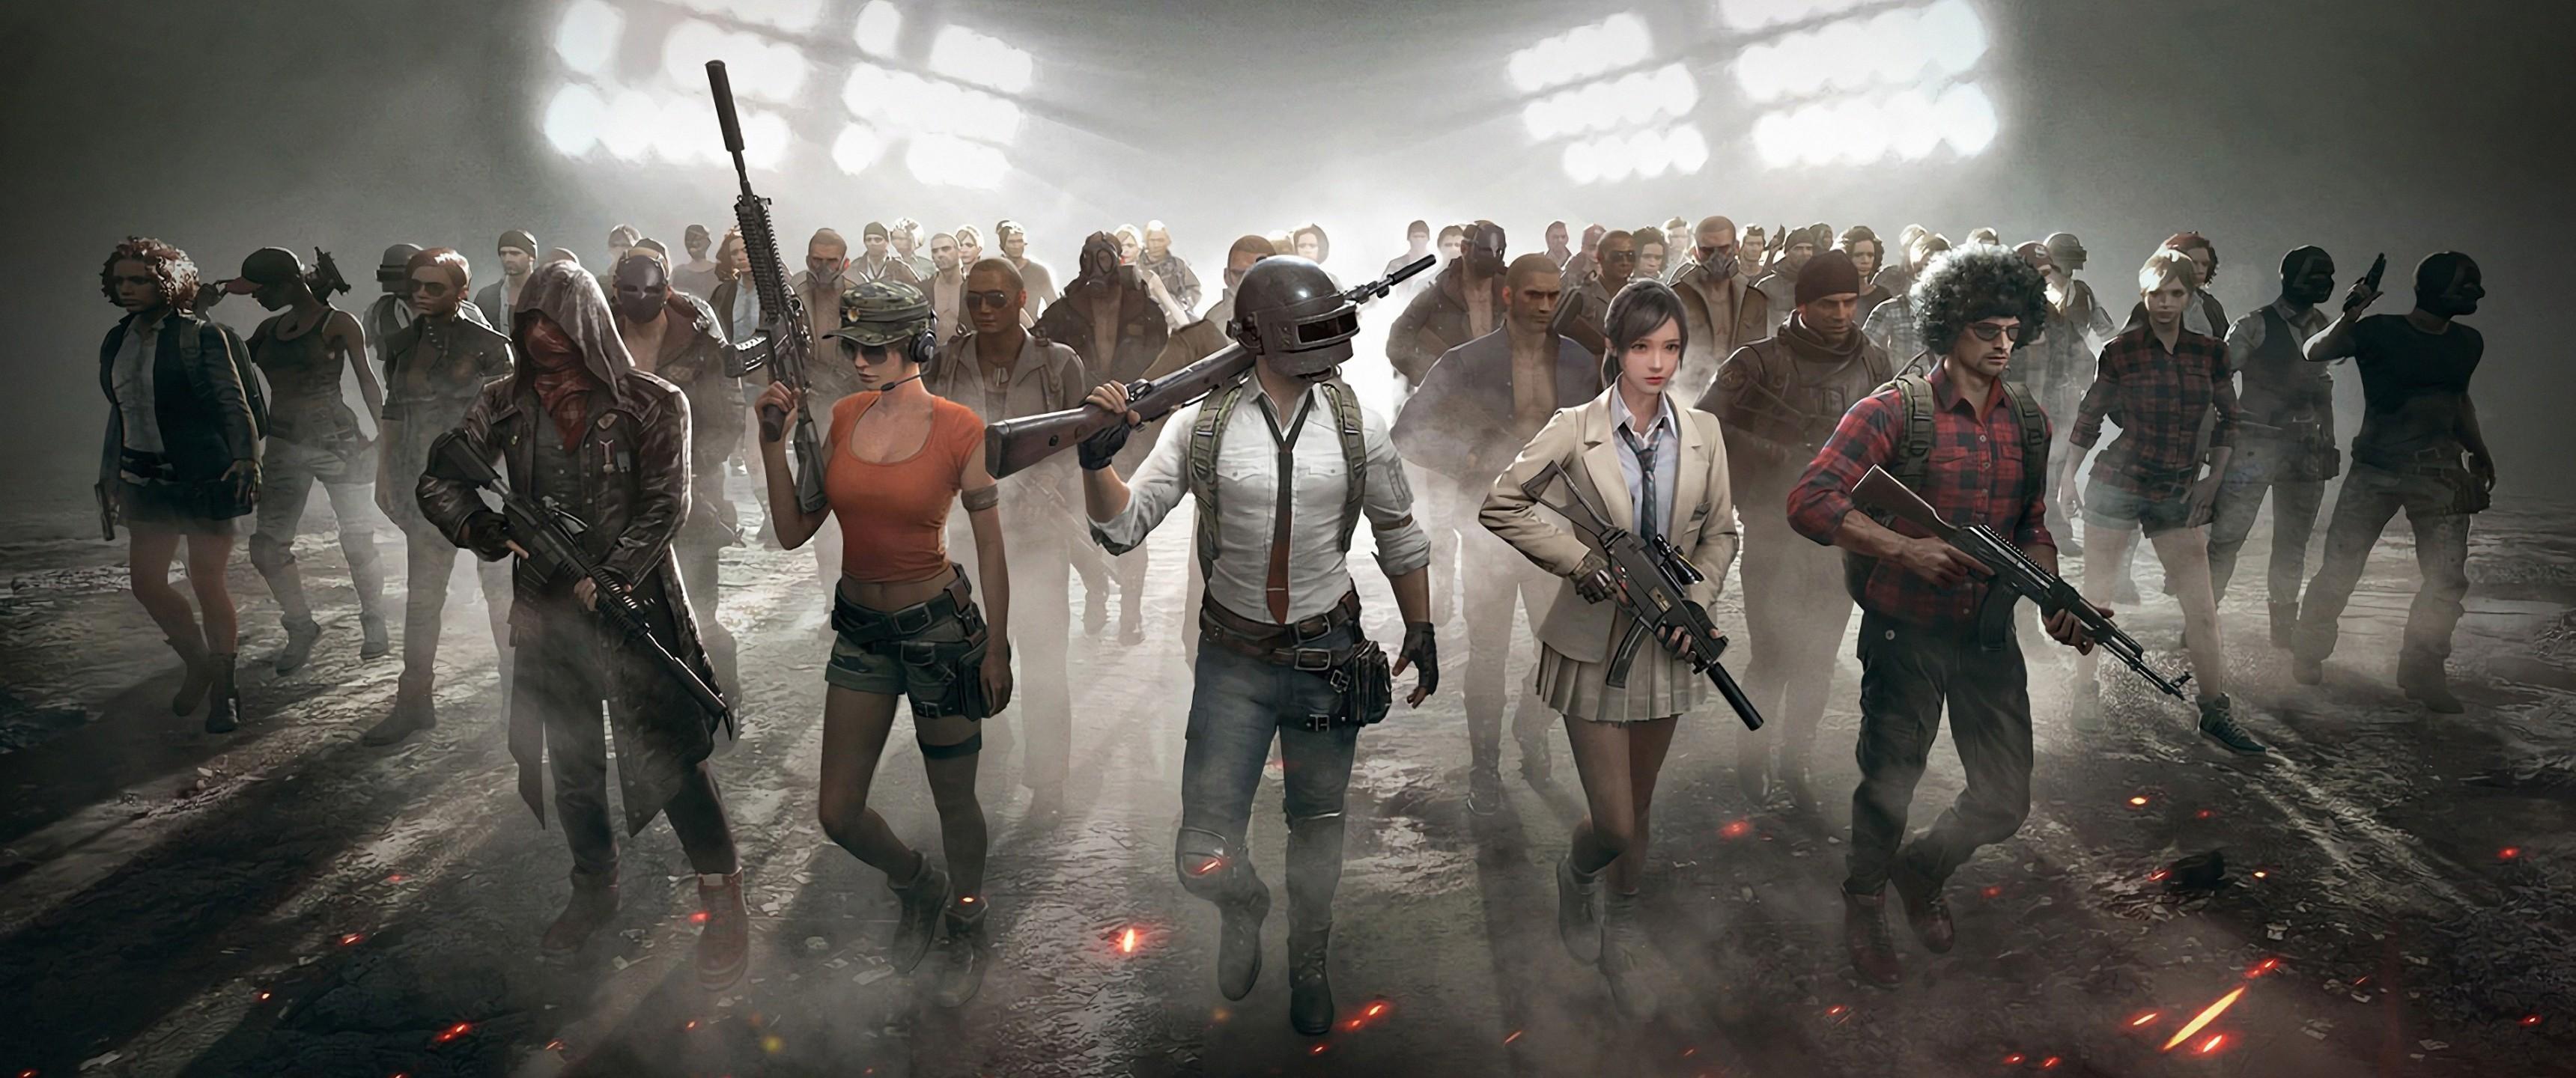 Download 3440x1440 Playerunknown's Battlegrounds, Characters, Pubg